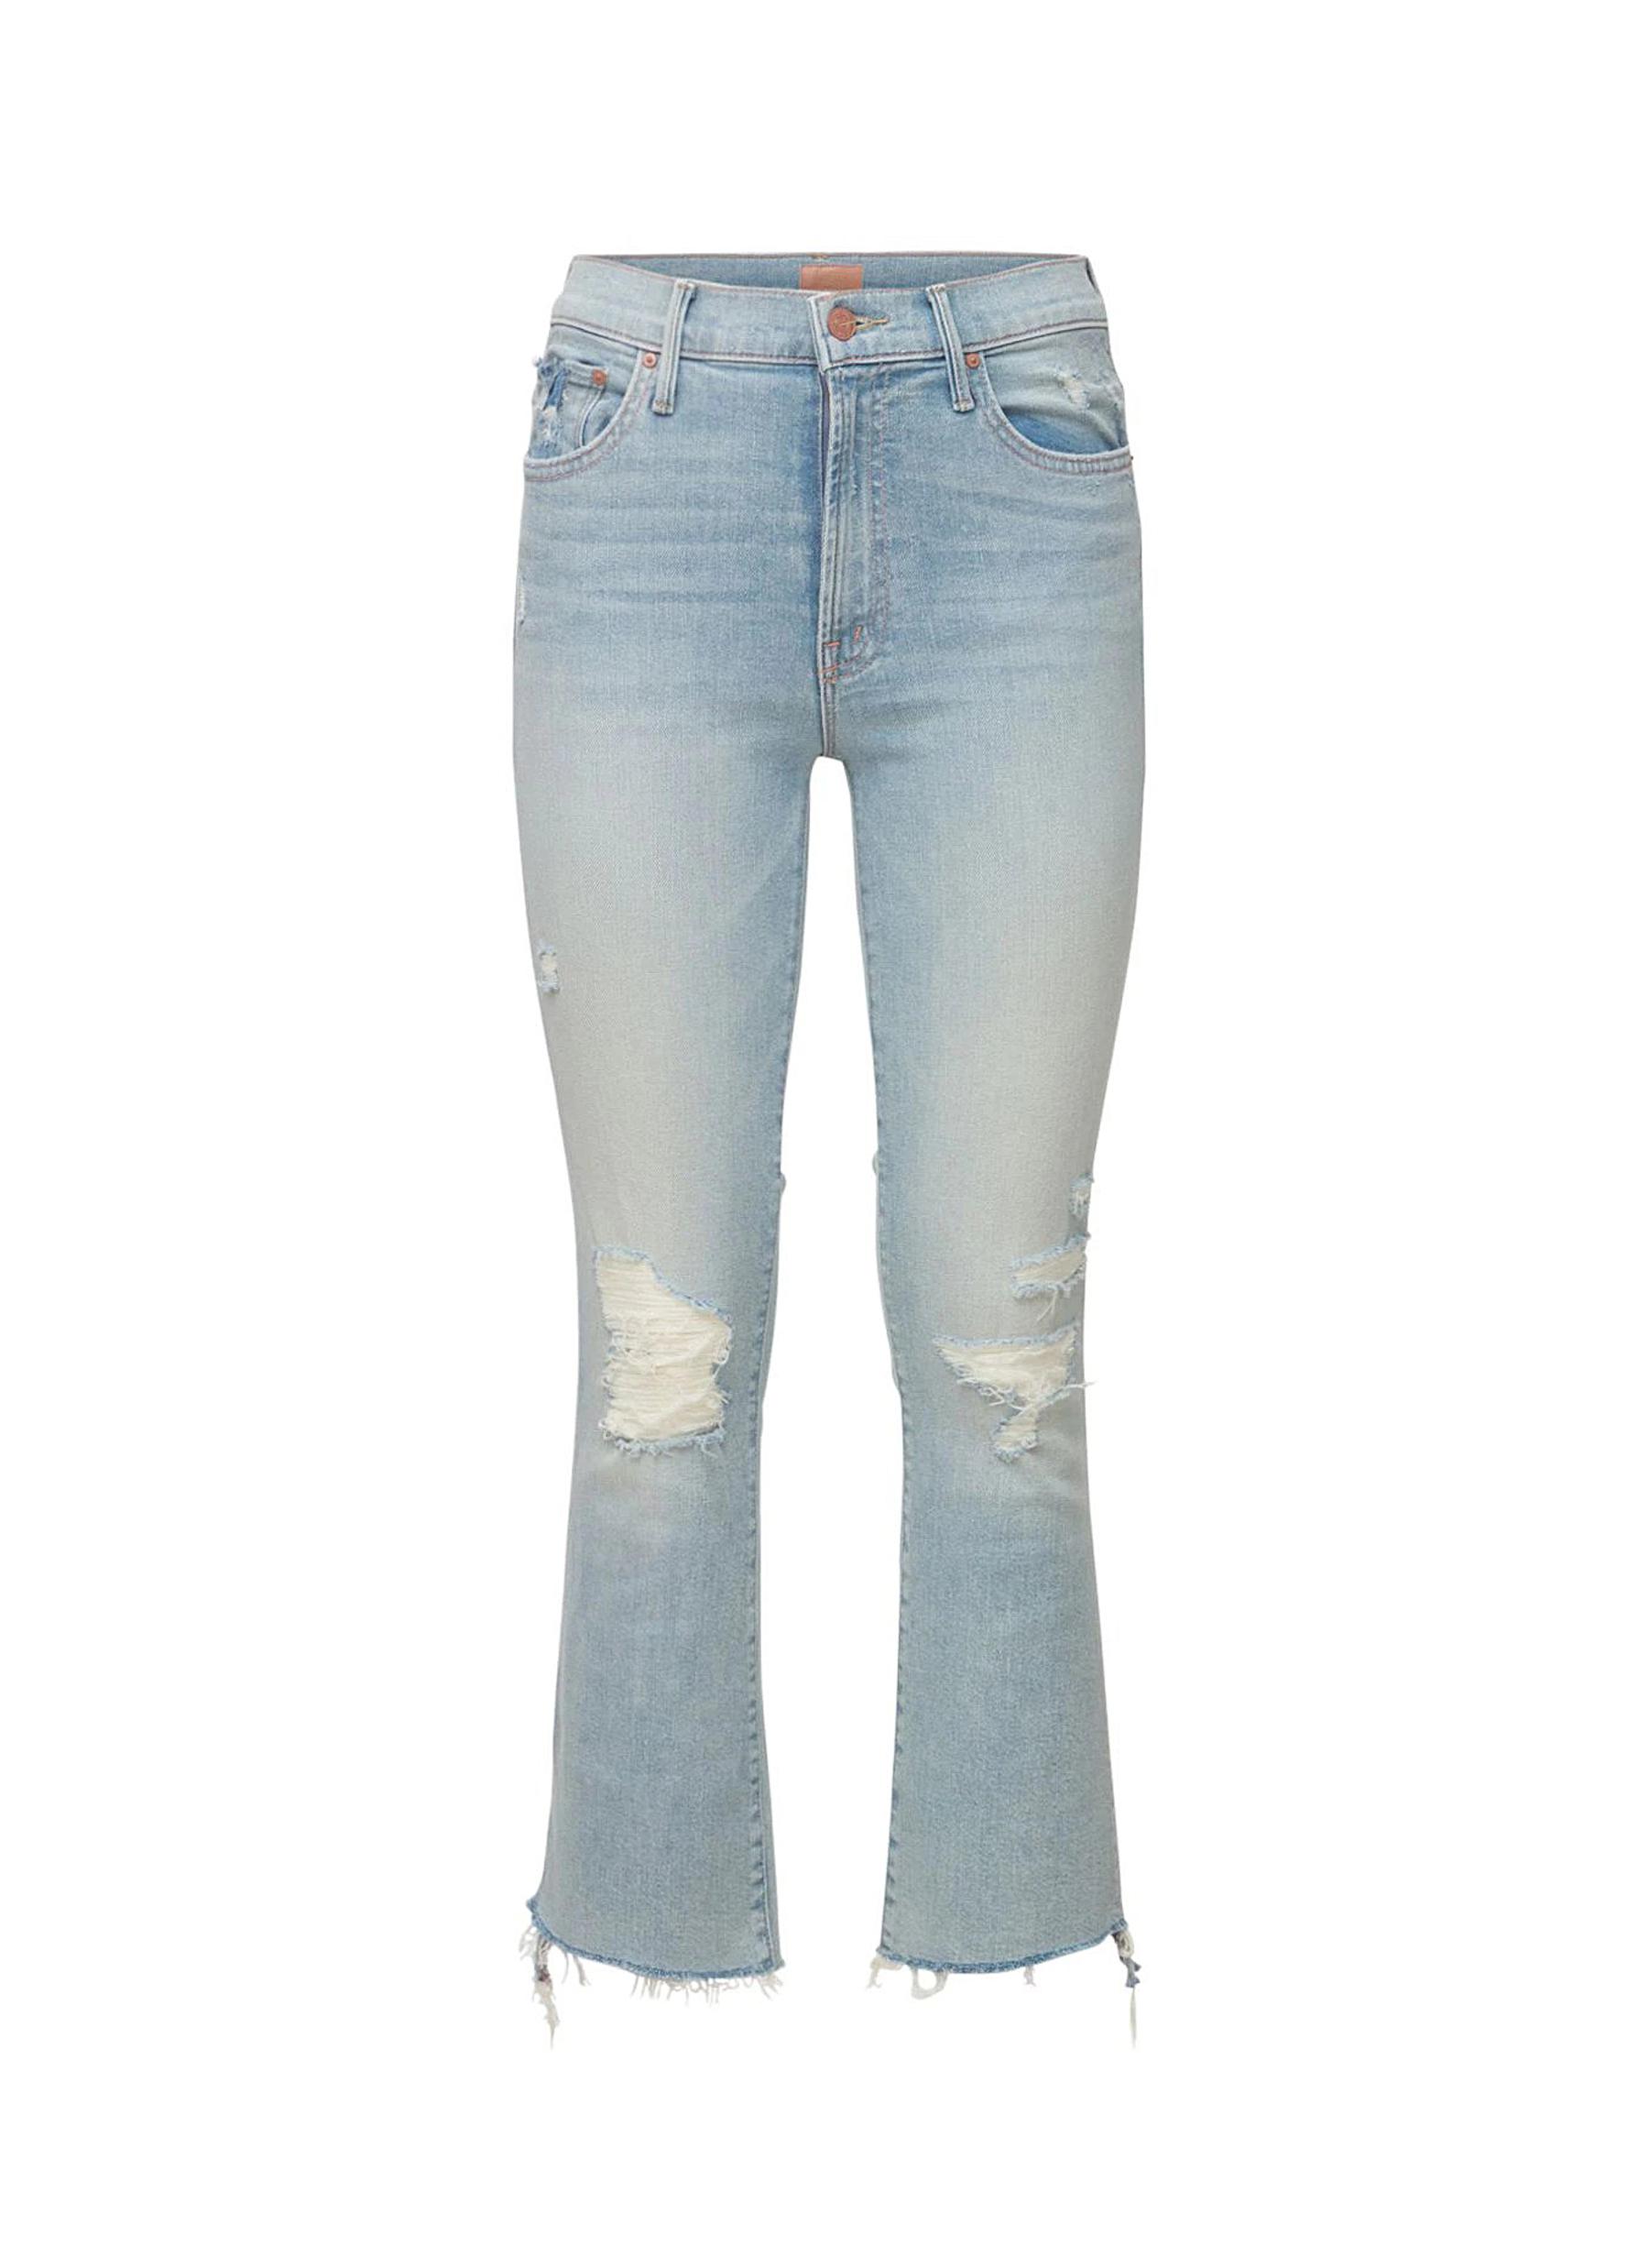 The Insider Crop Step Fray jeans by Mother